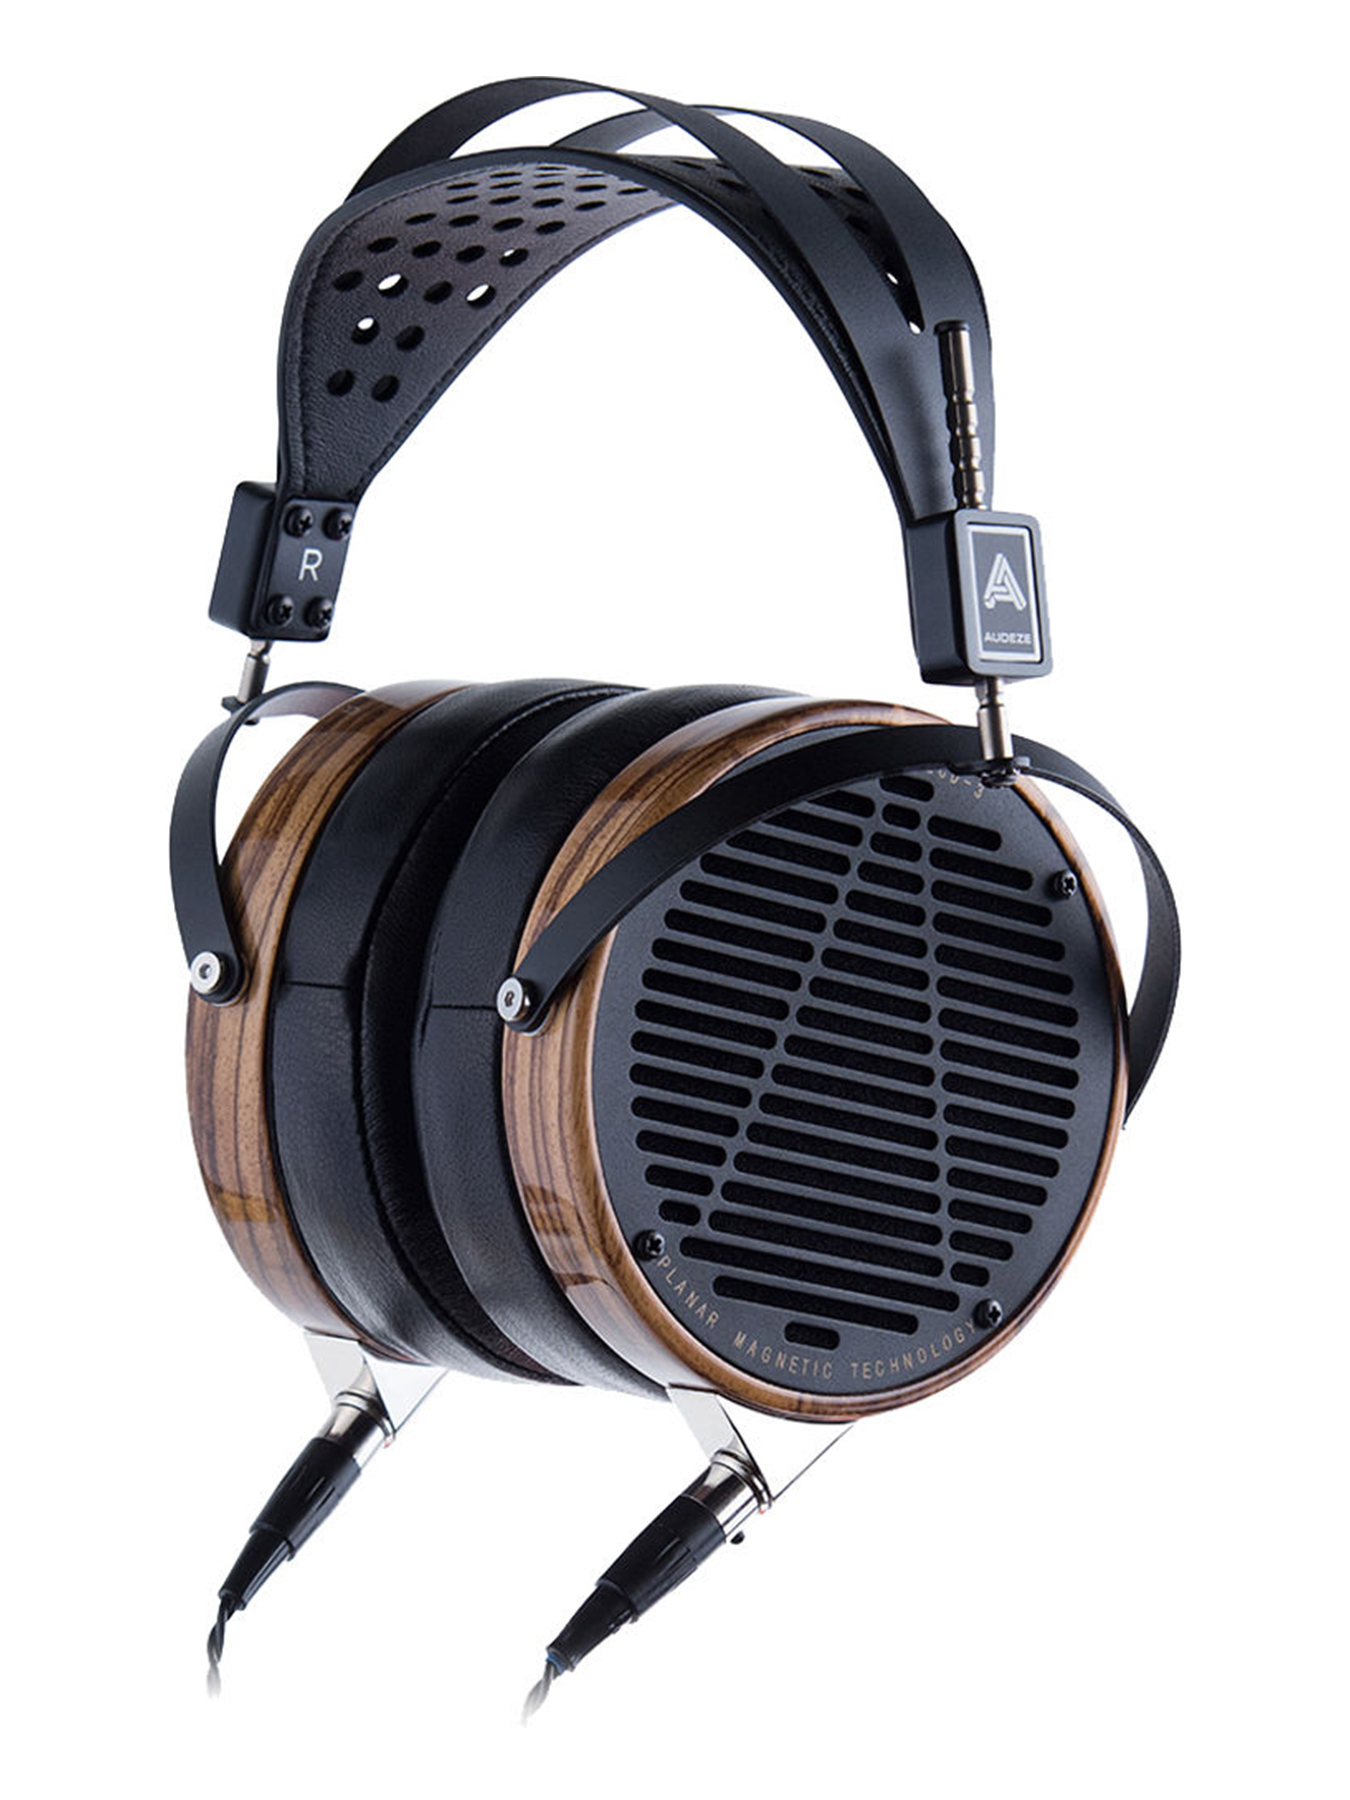 Audeze LCD-3 | High Performance Planar Magnetic Headphones With Ruggedized Travel Case (Zebrano Earcups, Lambskin Leather Earpads) Image 1